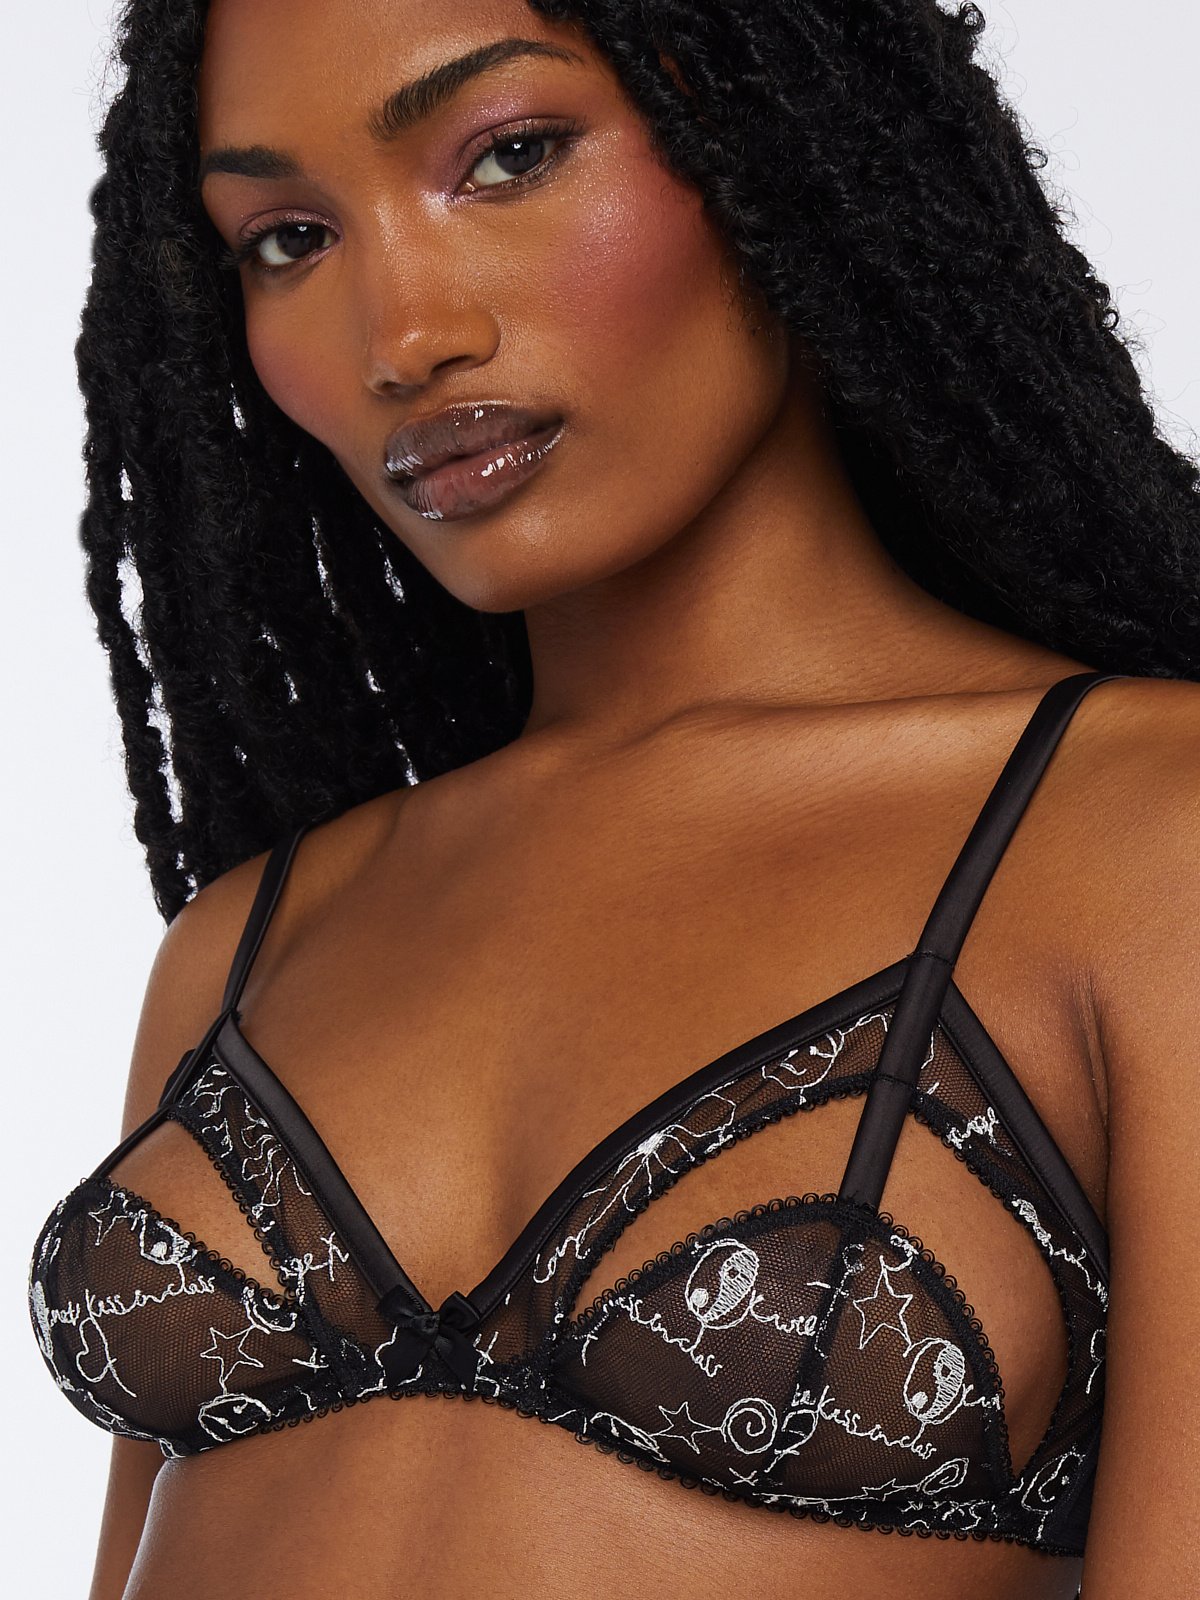 https://cdn.savagex.com/media/images/products/BB2042955-0687/DEAR-DIARY-EMBROIDERED-CAGED-BRALETTE-BB2042955-0687-1-1200x1600.jpg